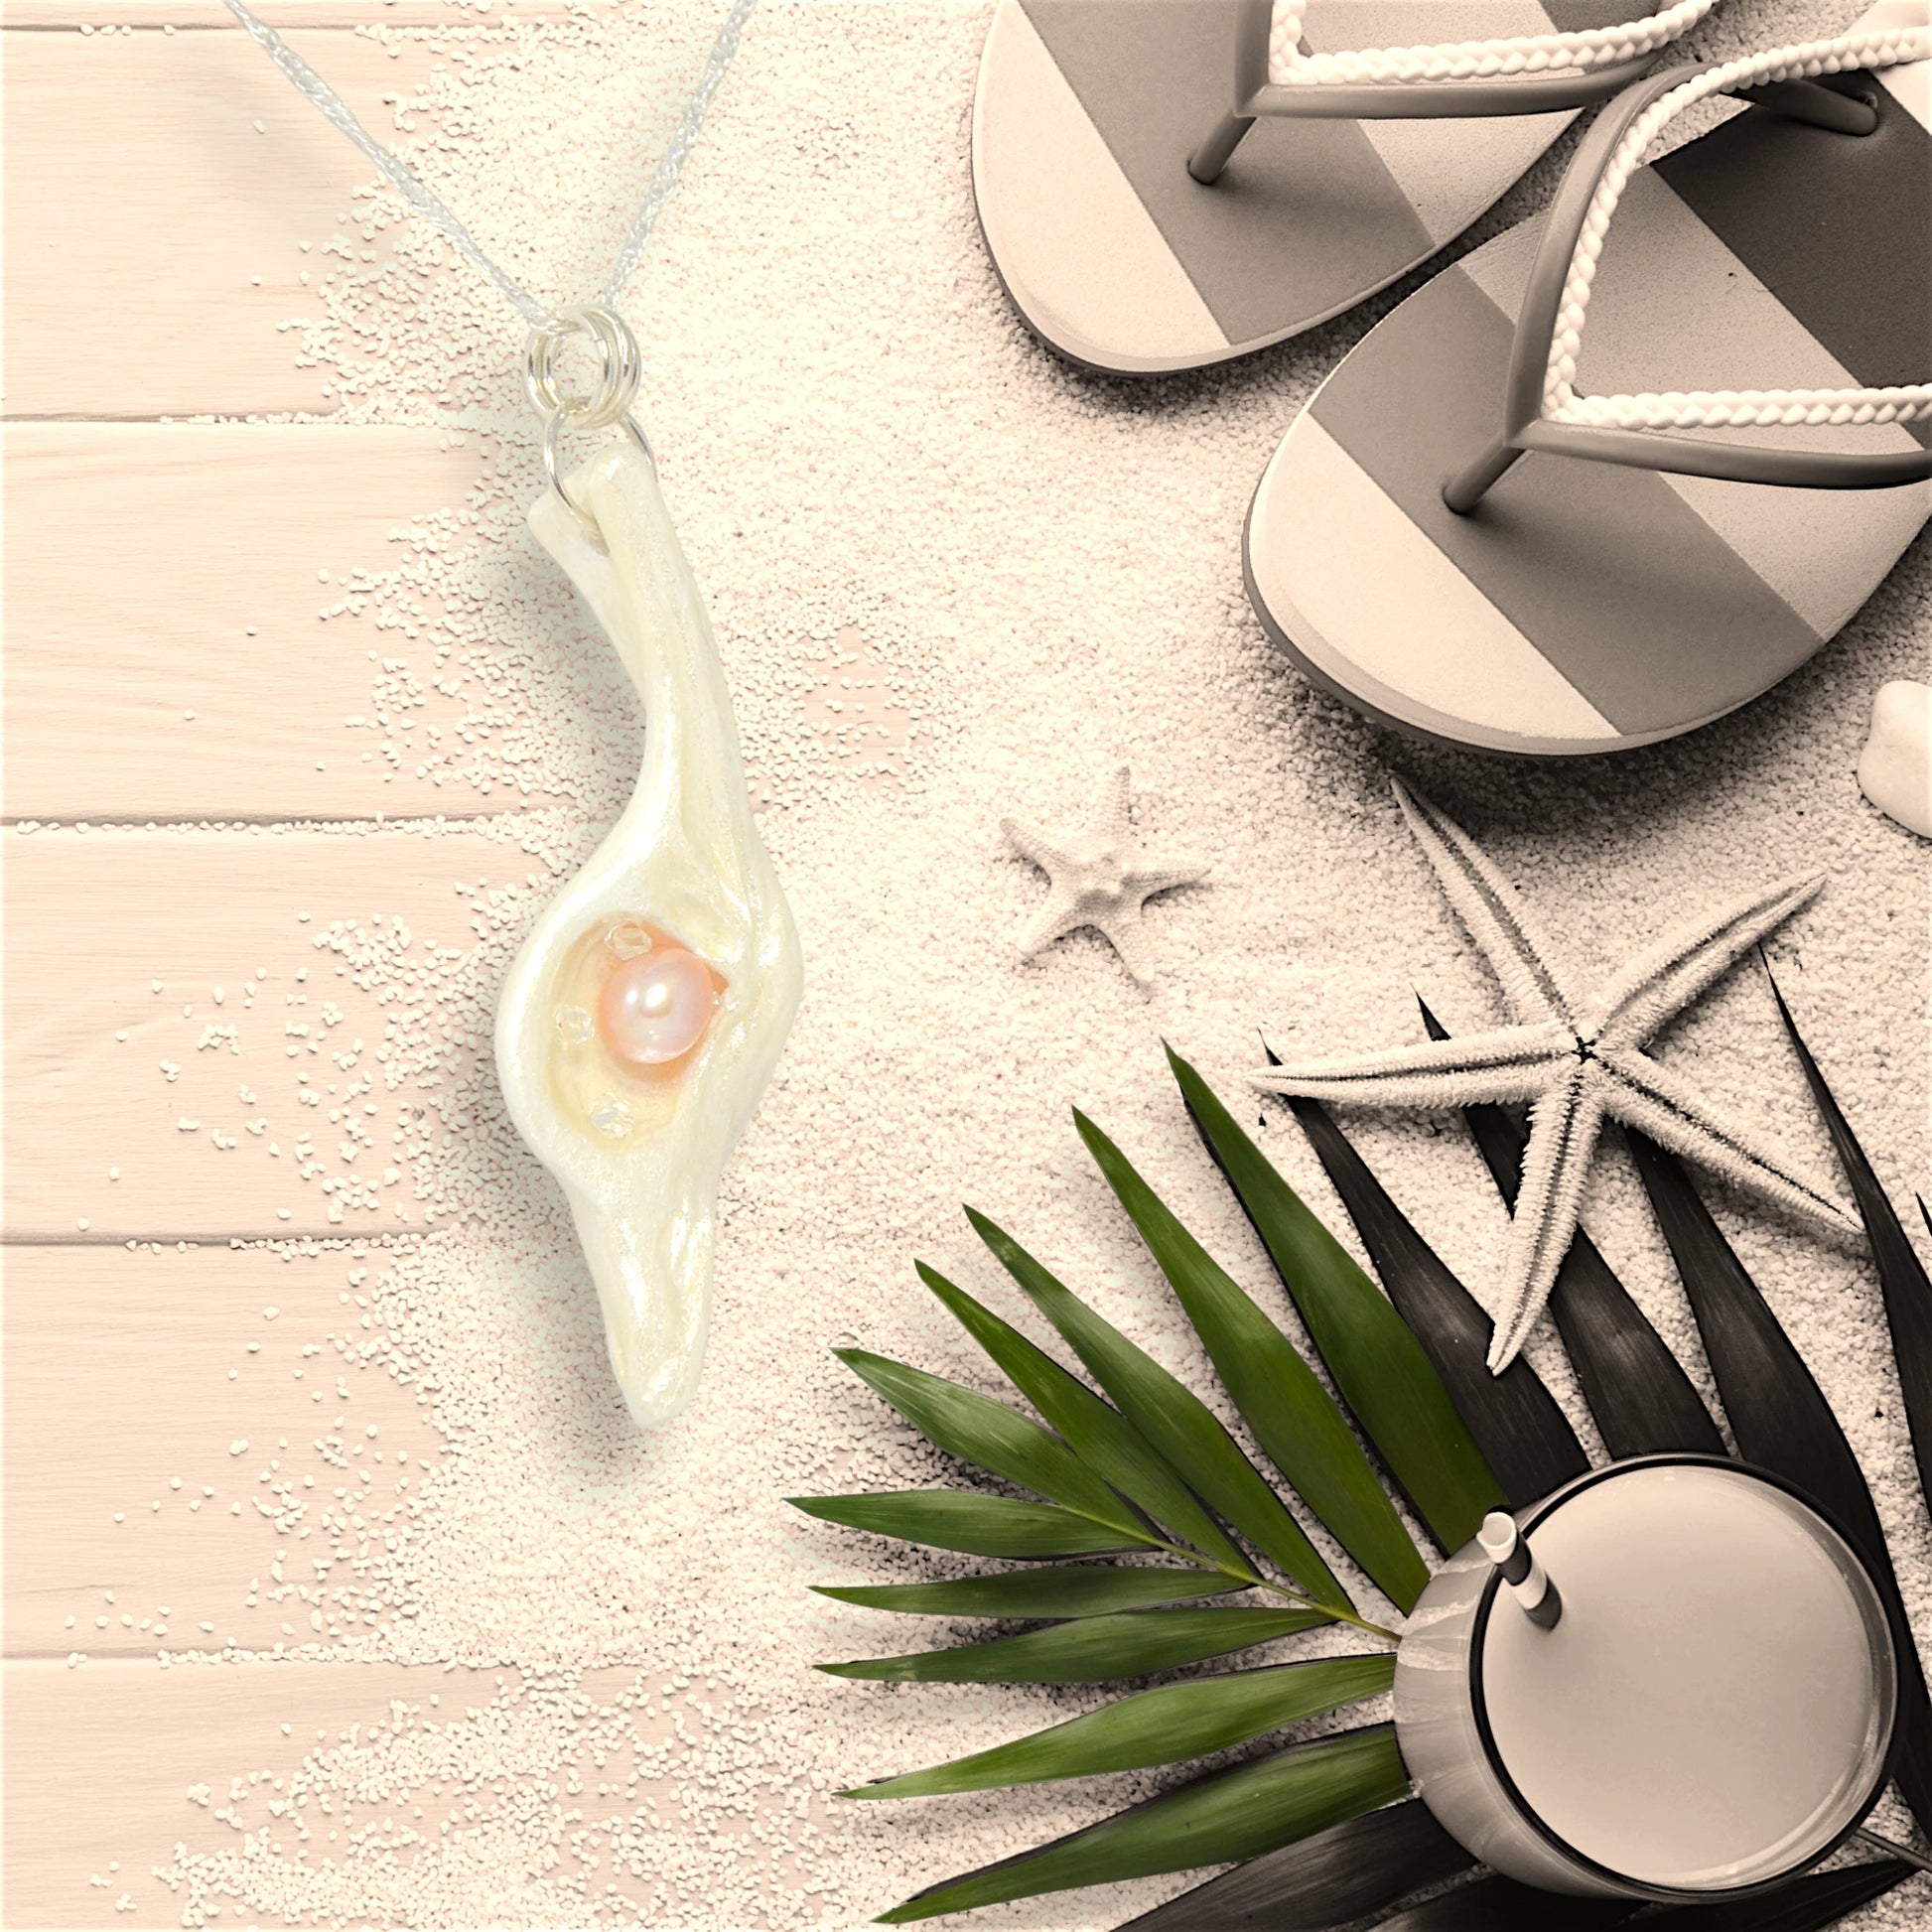 The pendant champagne on ice compliments any season but especially the summer!  The pendant is shown on a deck floor with sand, starfish, sandals and a summer refreshment.